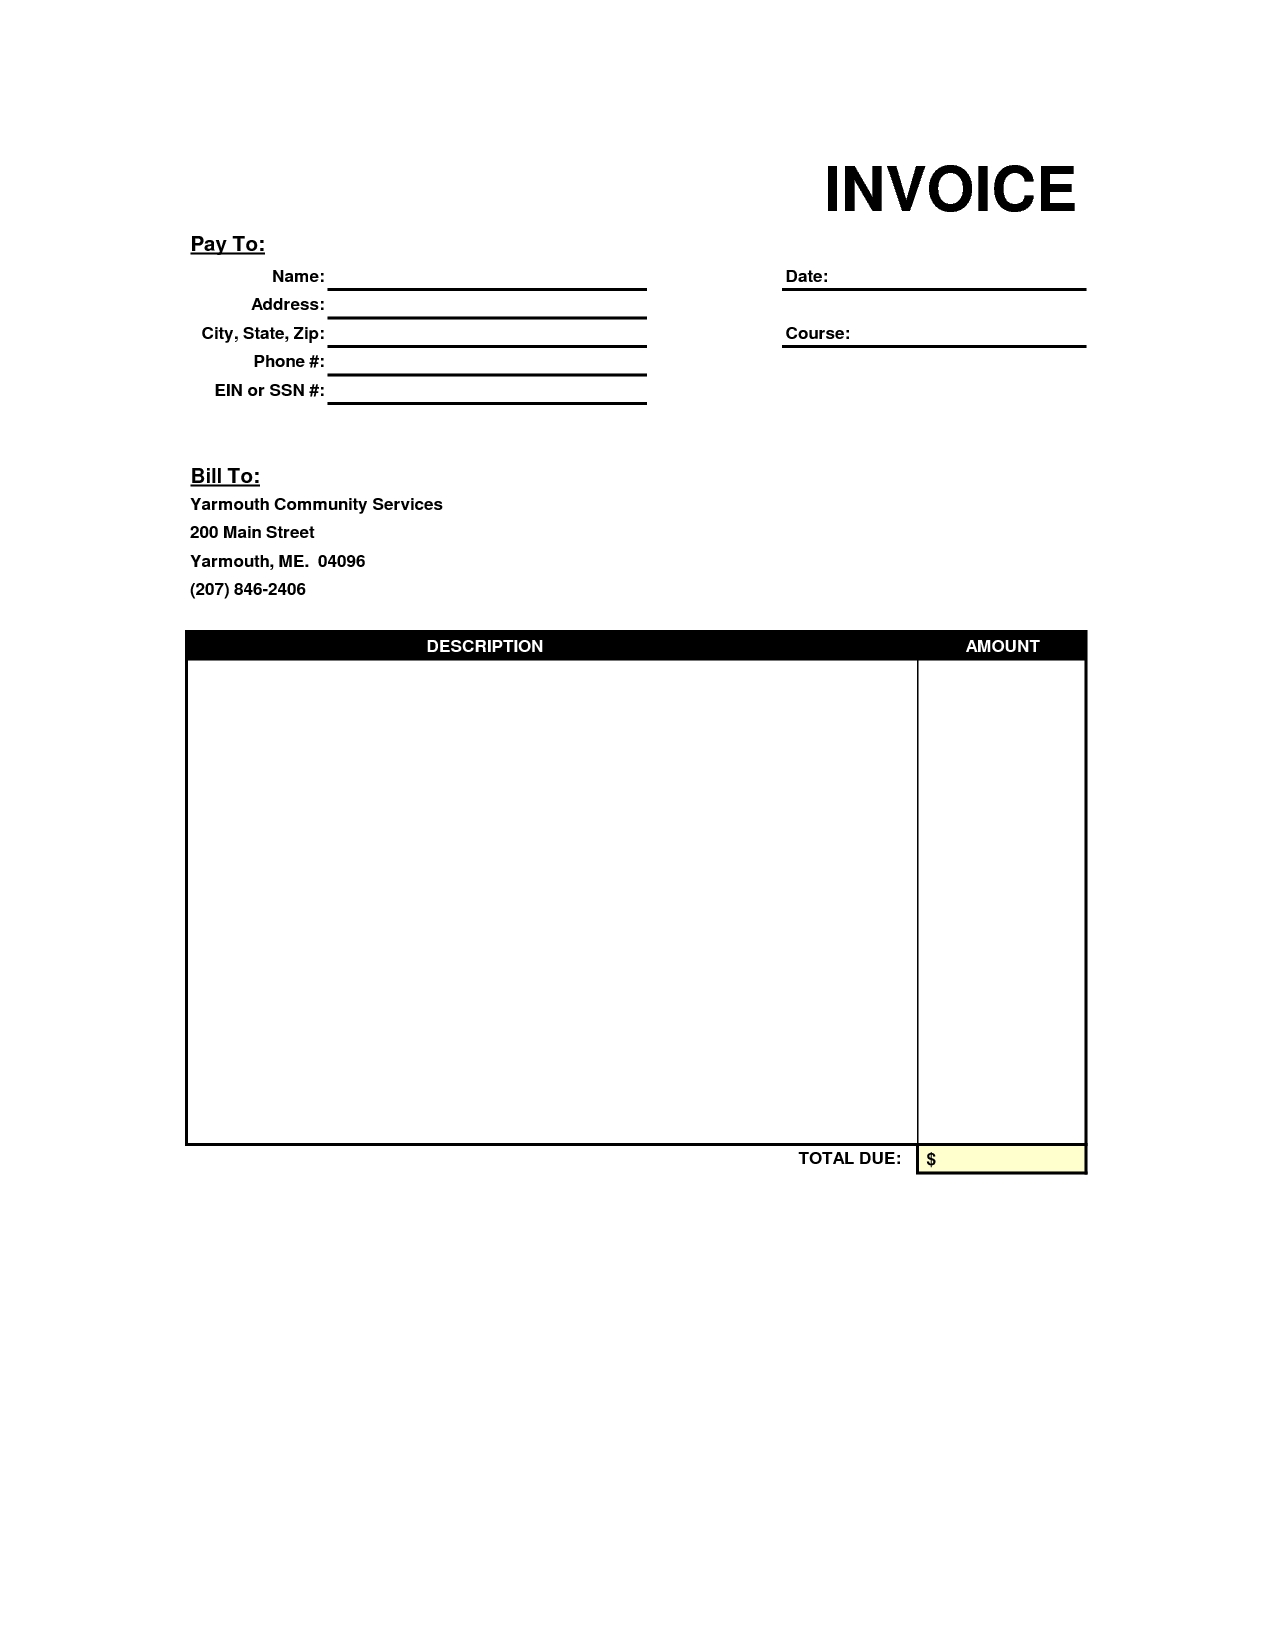 blank copy of an invoice google recruiter resume copy of blank invoice